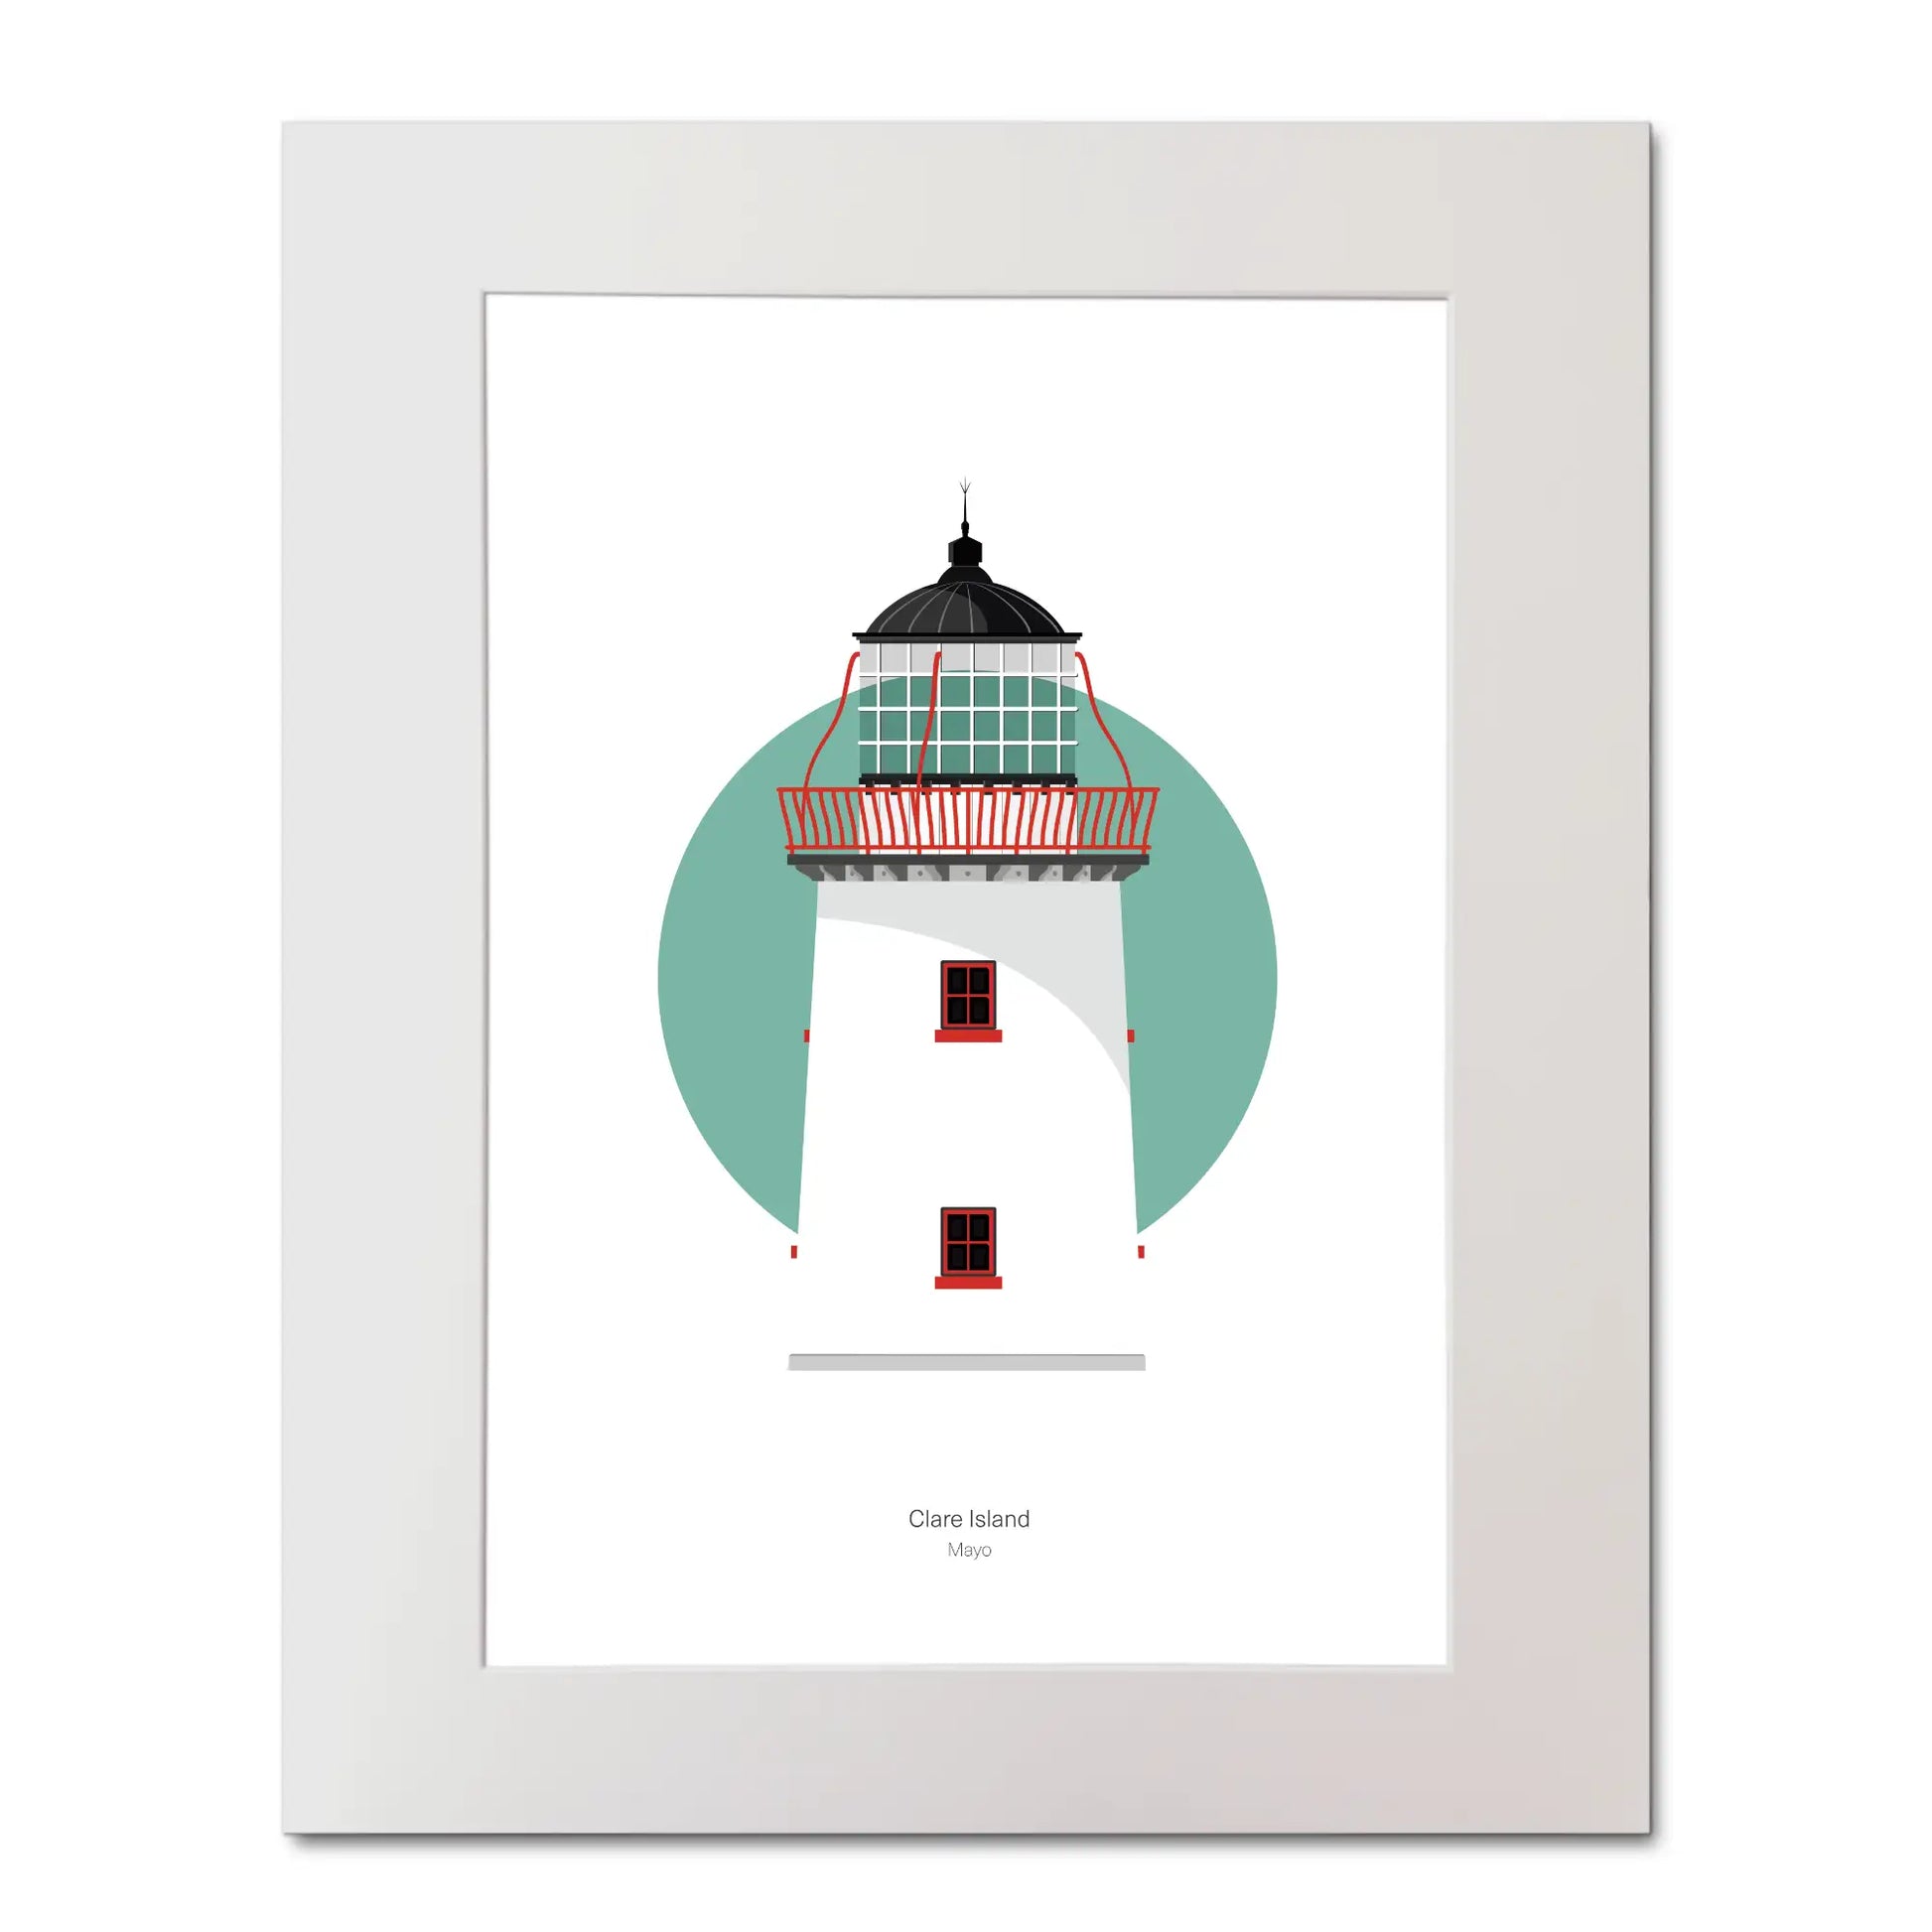 Illustration of Clare Island lighthouse on a white background inside light blue square, mounted and measuring 40x50cm.